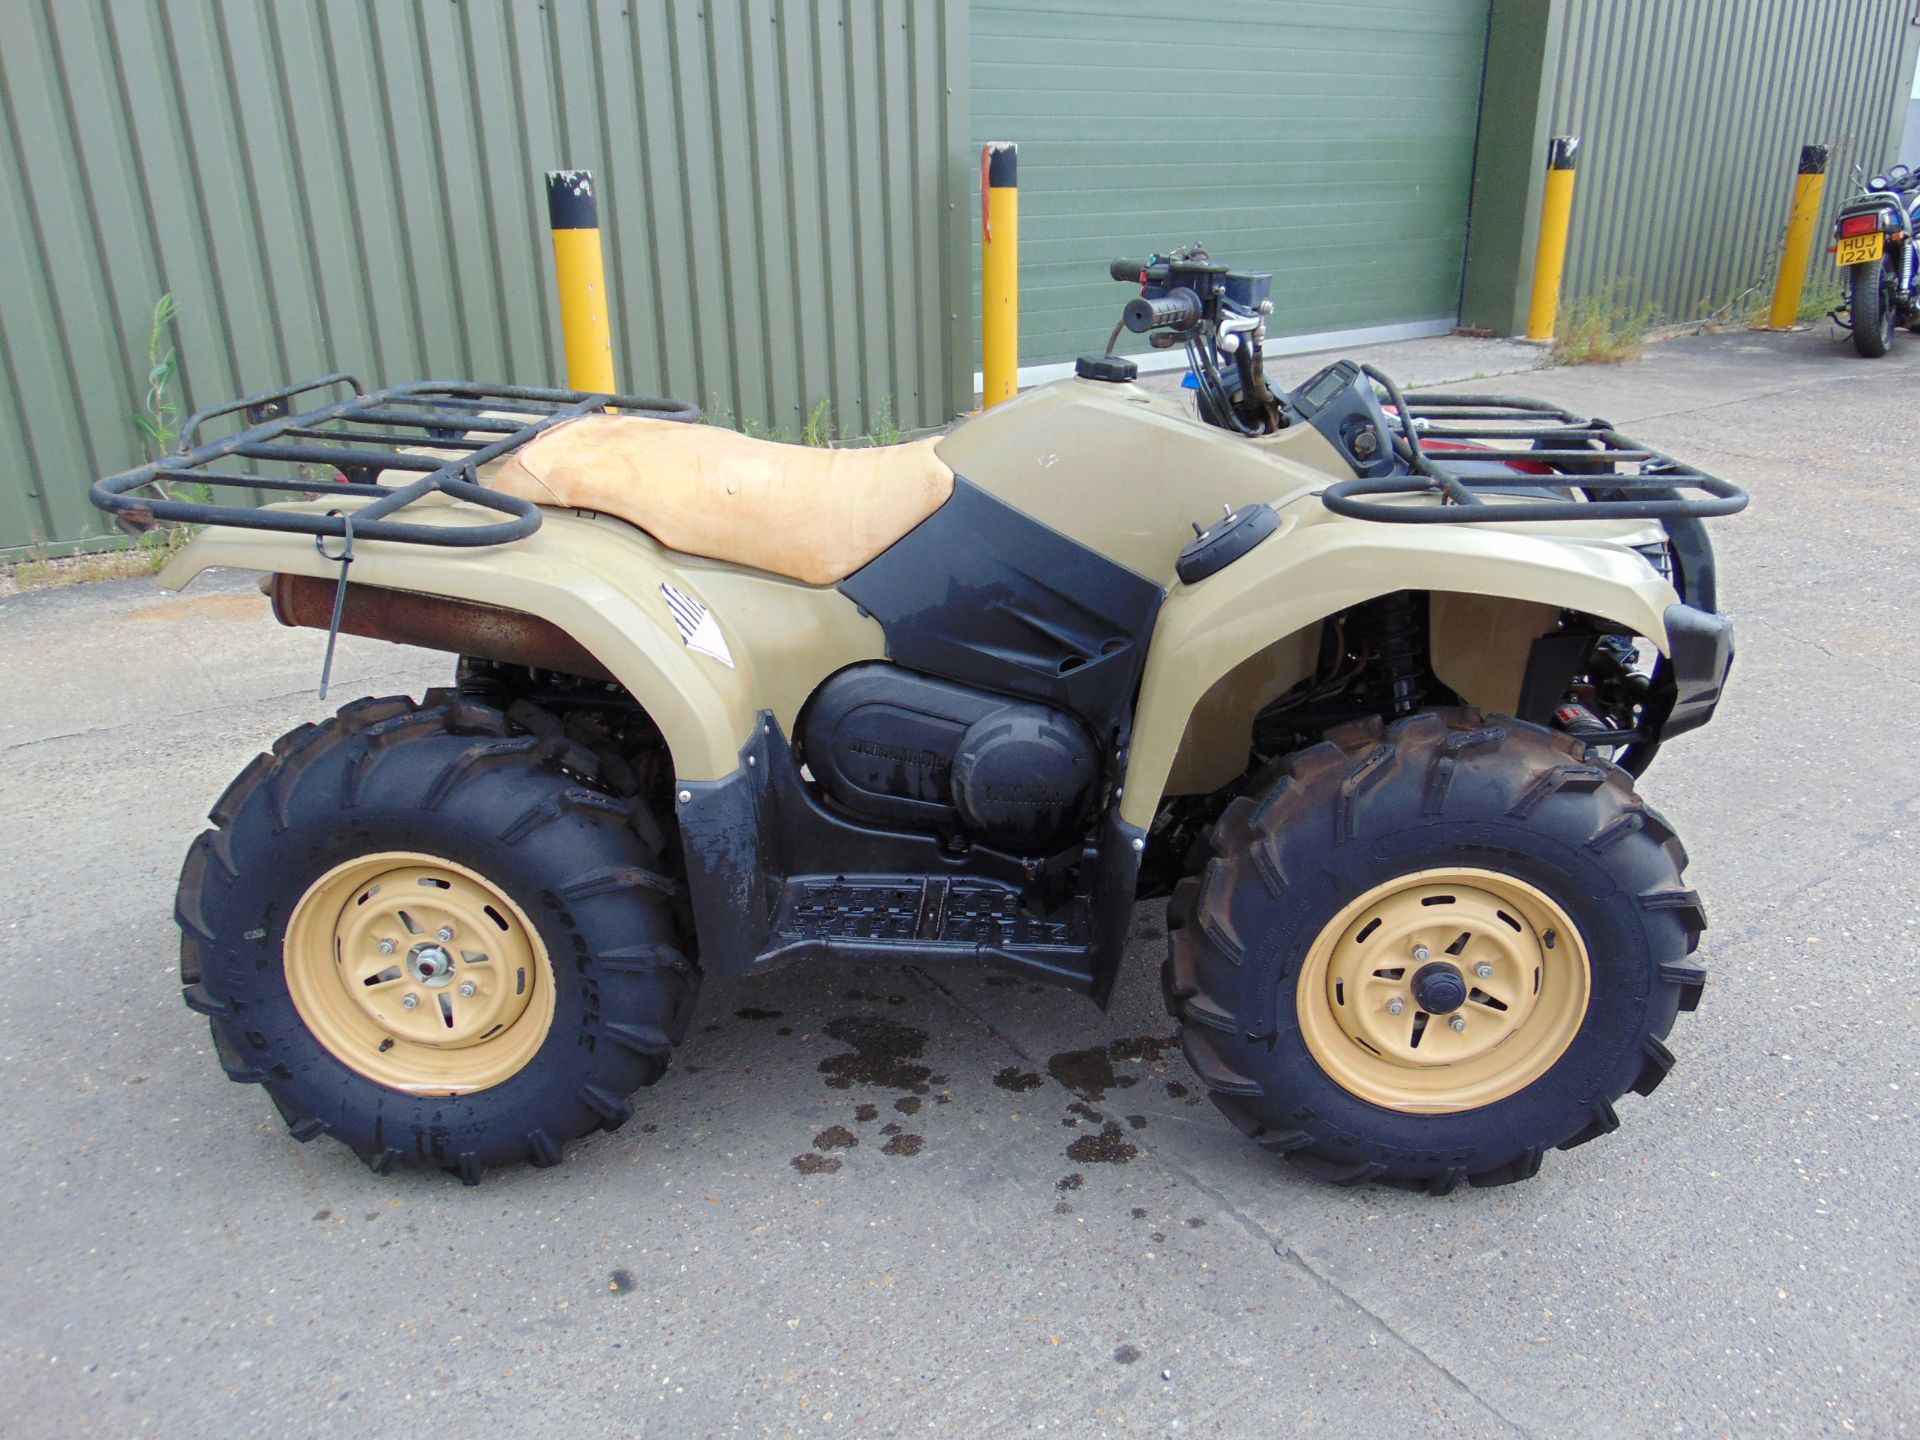 Military Specification Yamaha Grizzly 450 4 x 4 ATV Quad Bike ONLY 213 HOURS! - Image 5 of 18